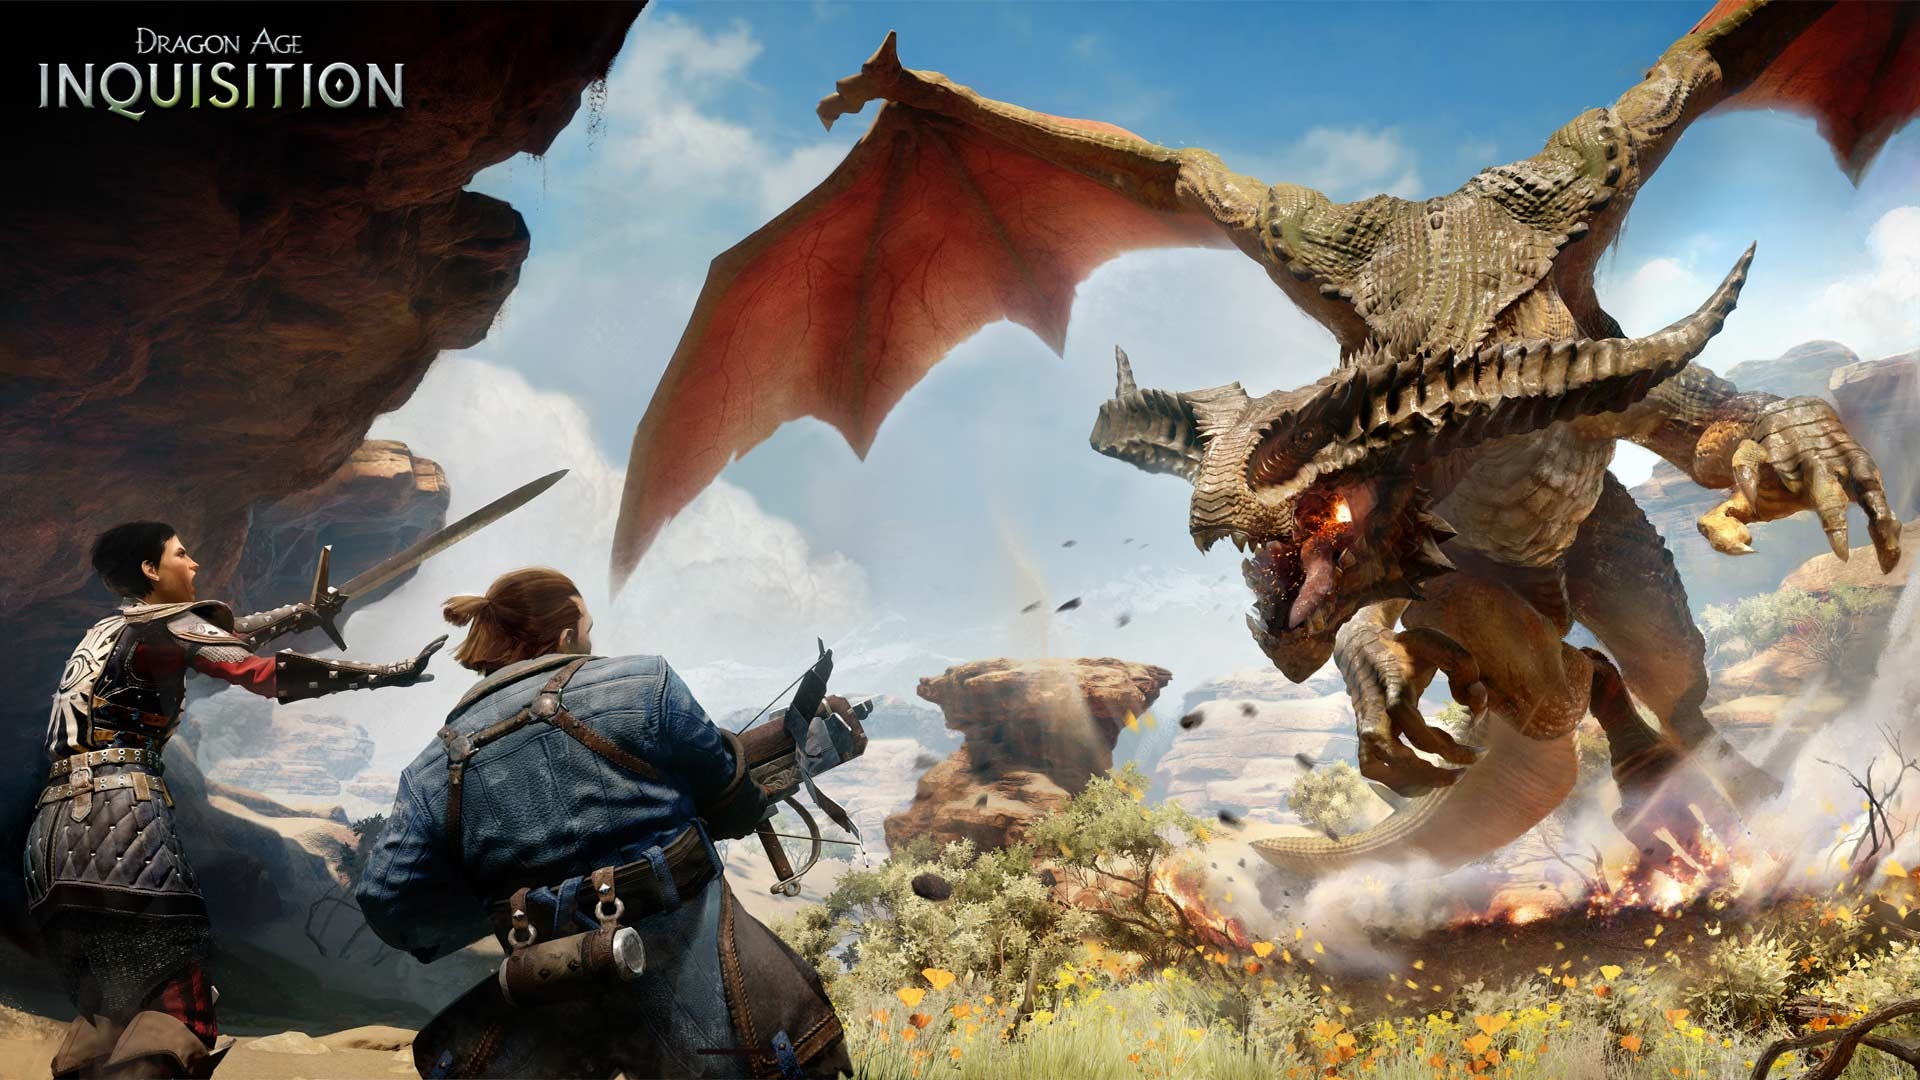 Dragon Age is probably going to look great on every platform, but the studio knows that gamers are very sensitive about resolutions right now.